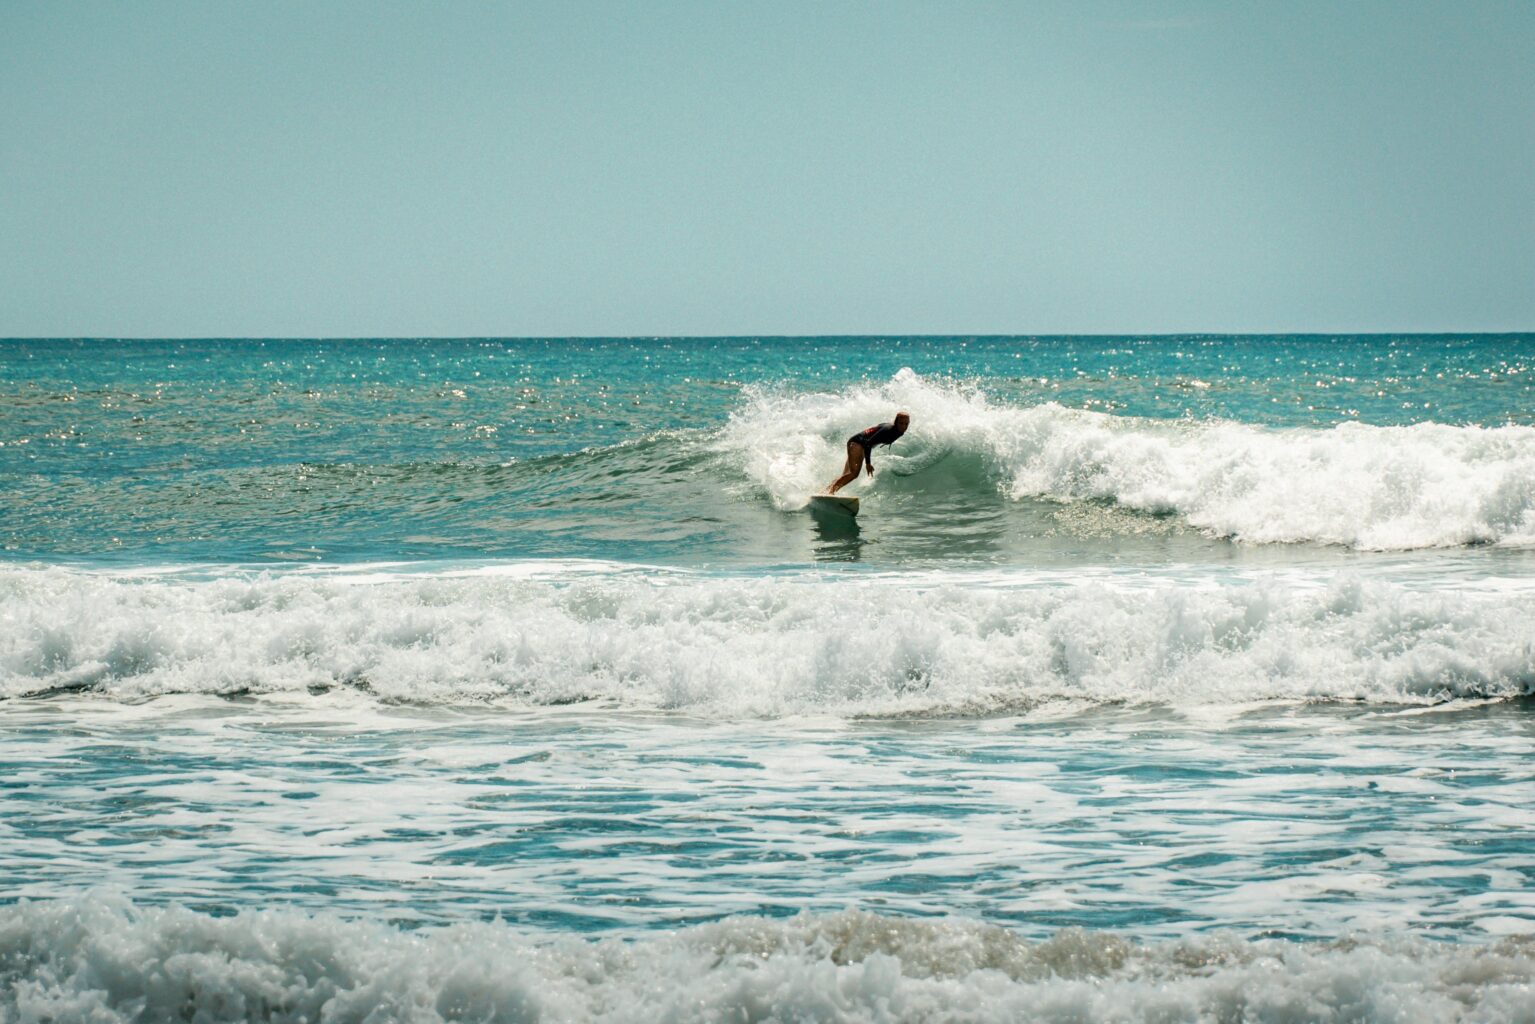 Surfing at Diggers